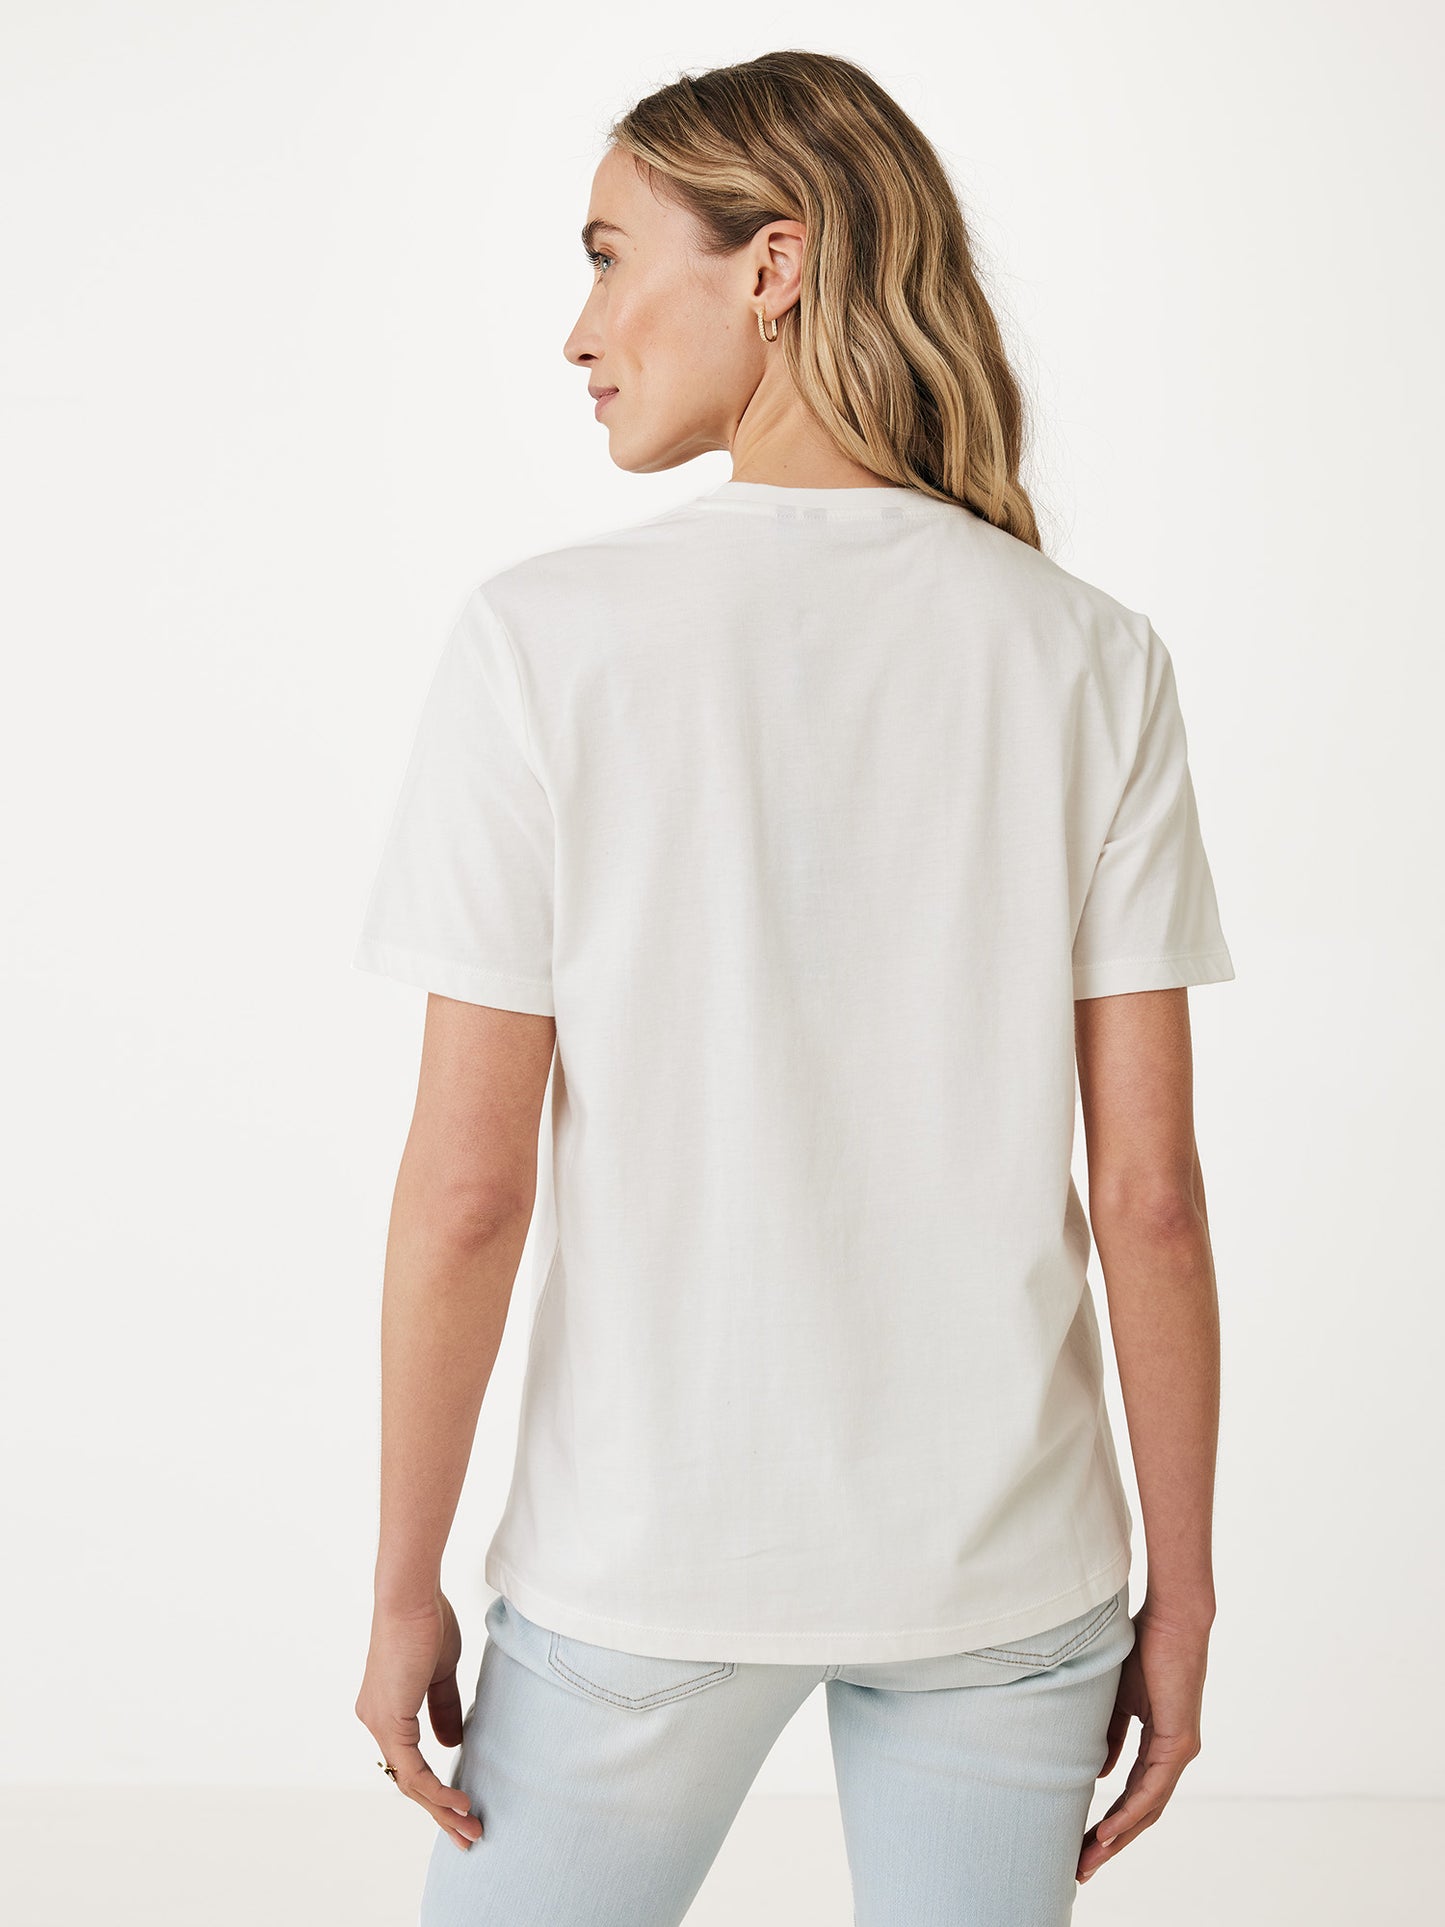 T-shirt with a cut-out neckline and a design